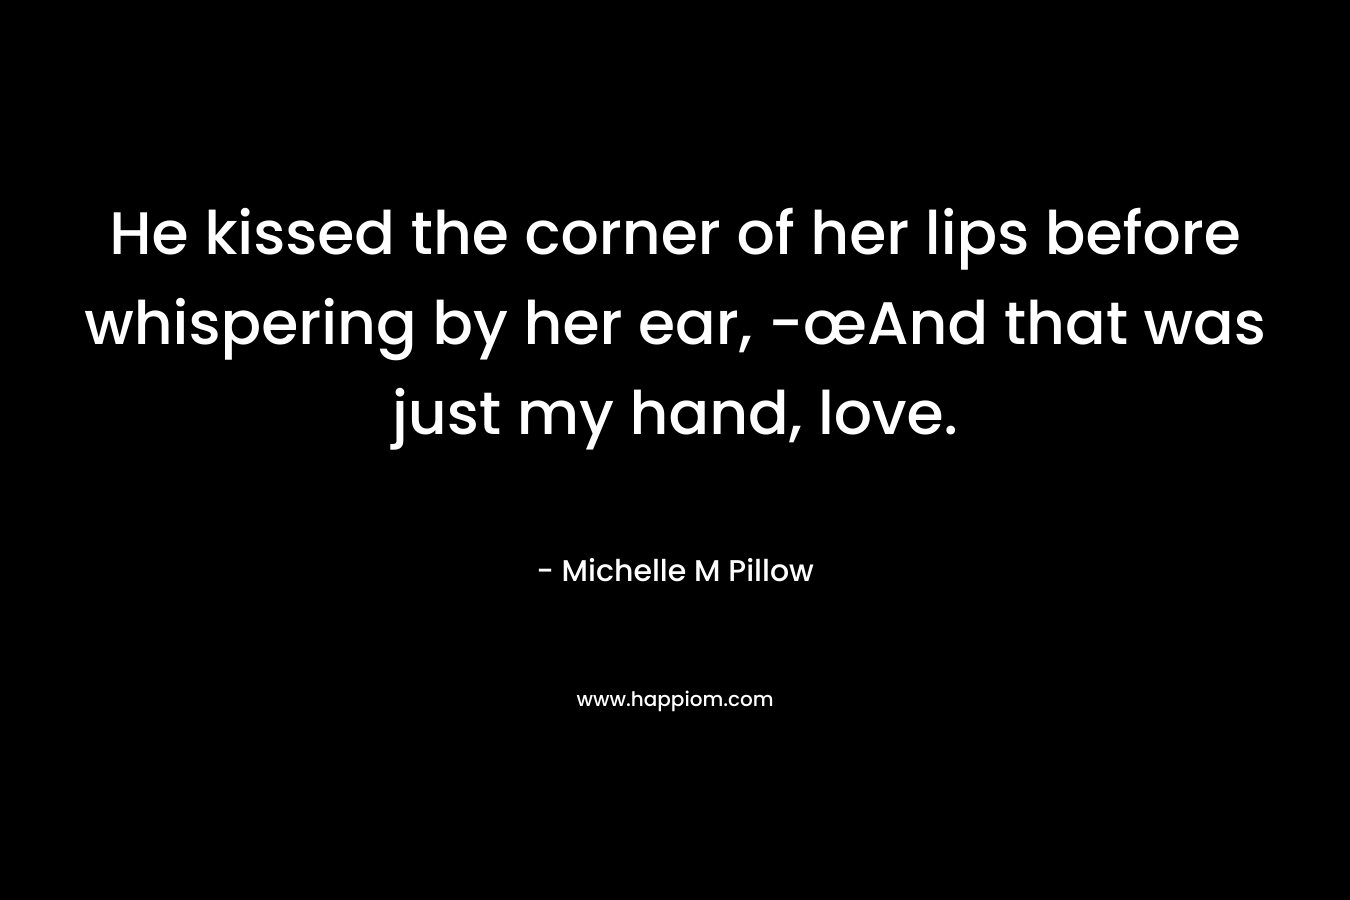 He kissed the corner of her lips before whispering by her ear, -œAnd that was just my hand, love.